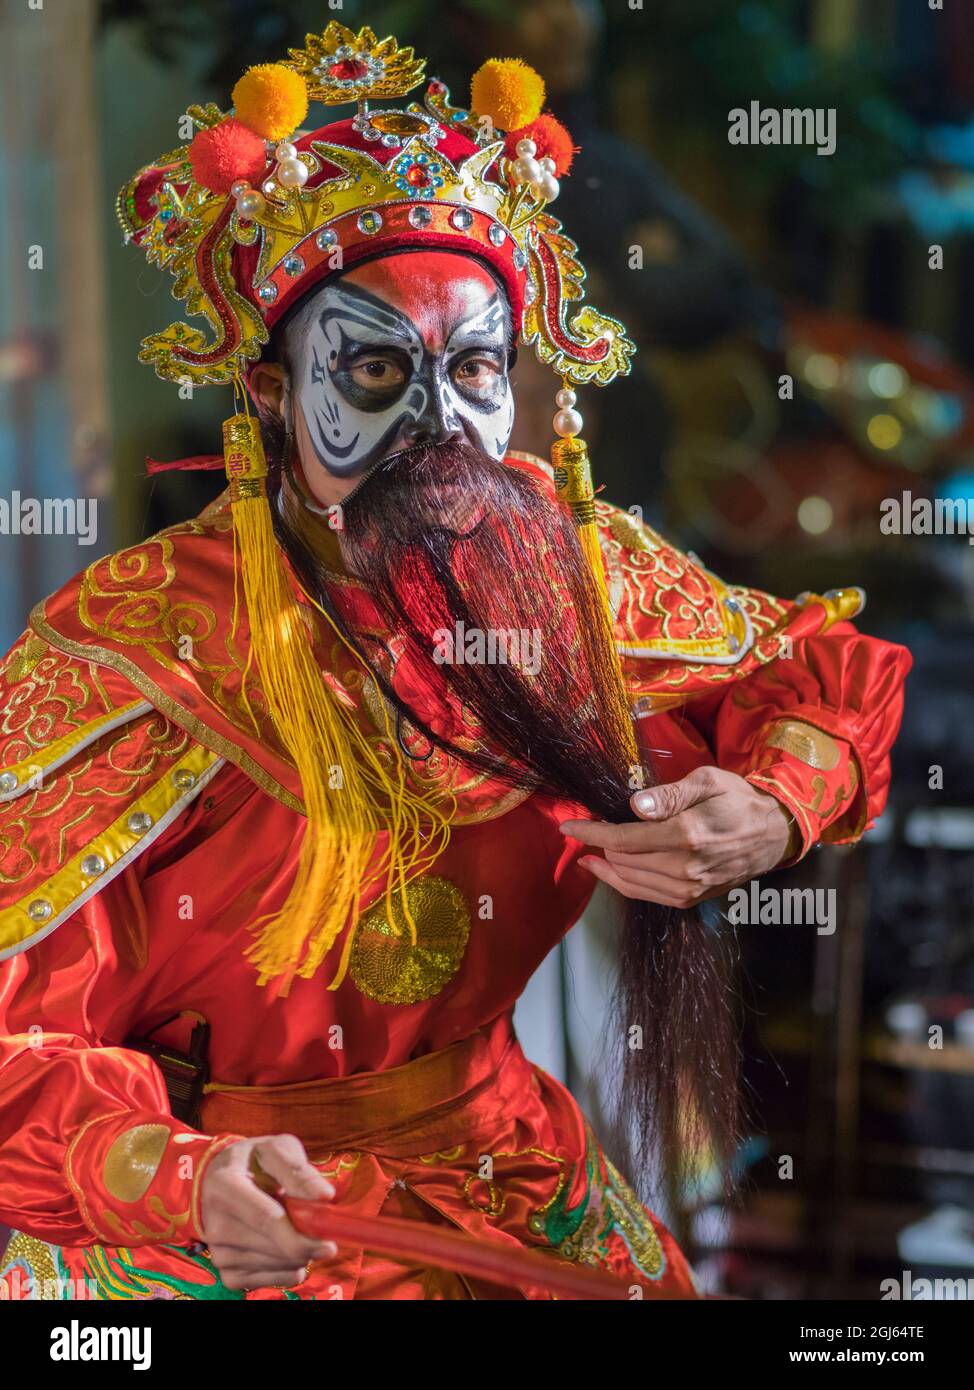 Asia, Vietnam, Hanoi, old quarter. Dancer with face paint and false beard. (Editorial Use Only) Stock Photo